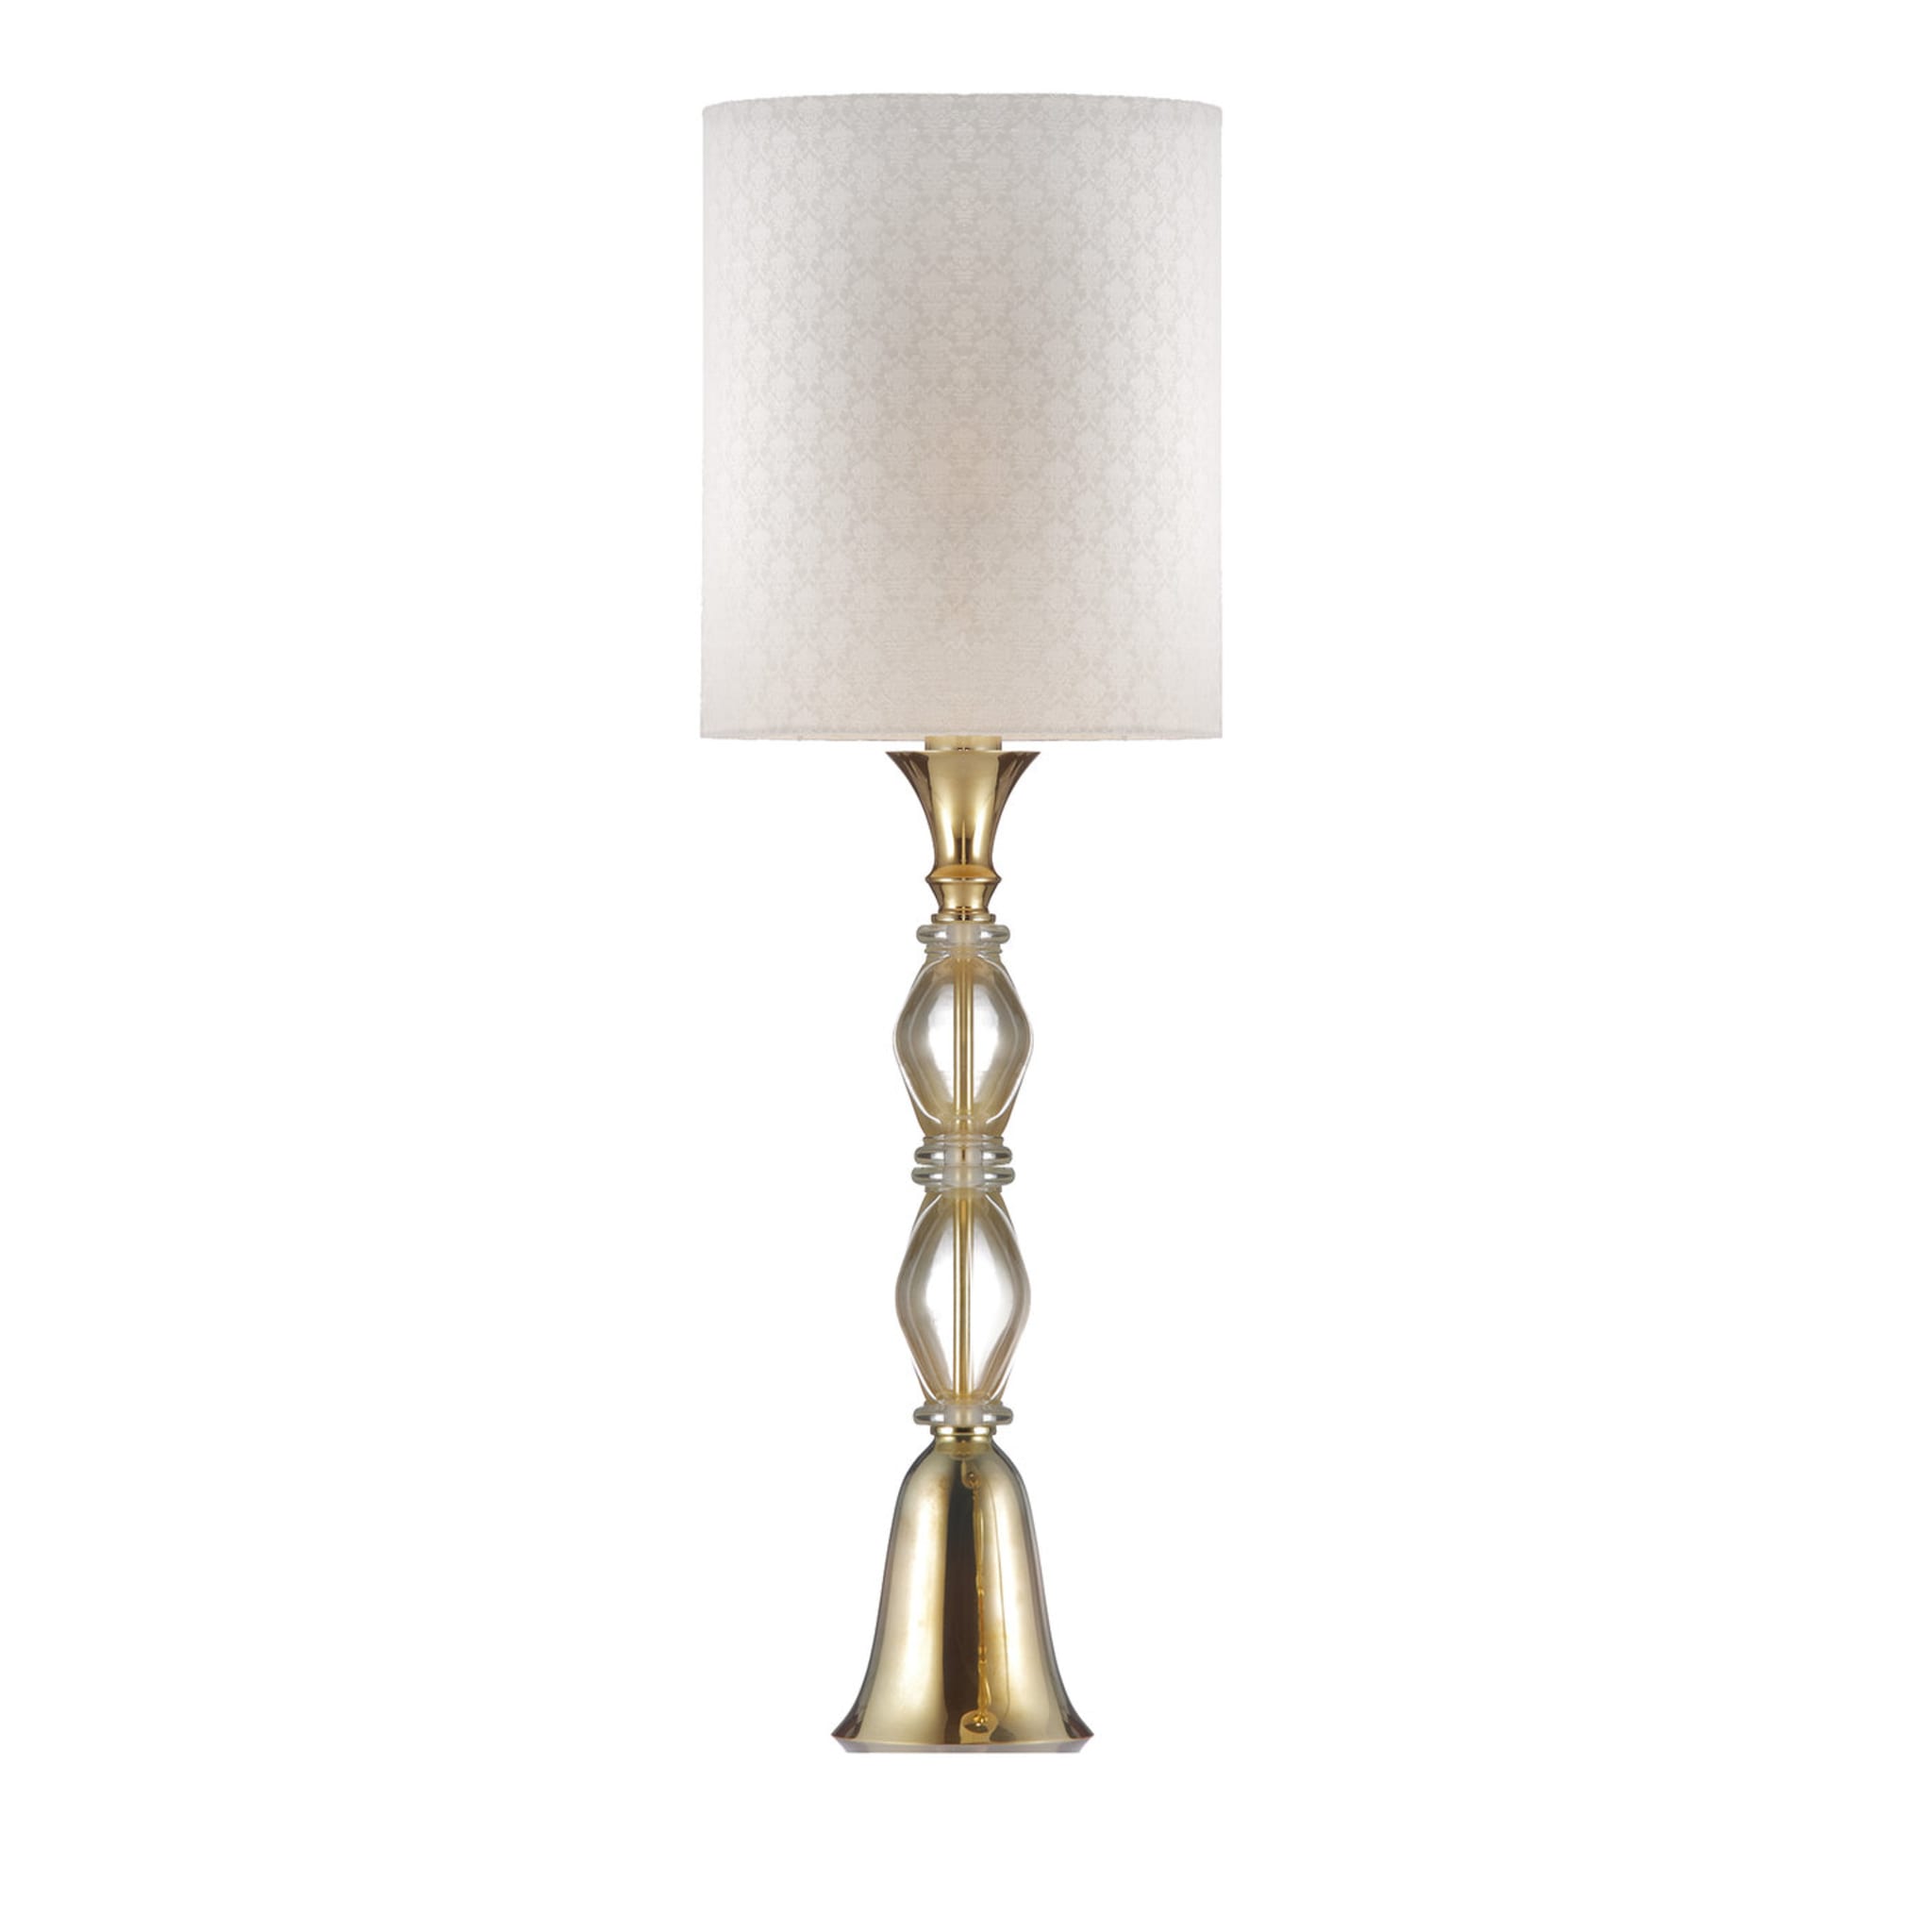 G-Gold Murano Large Table Lamp - Main view